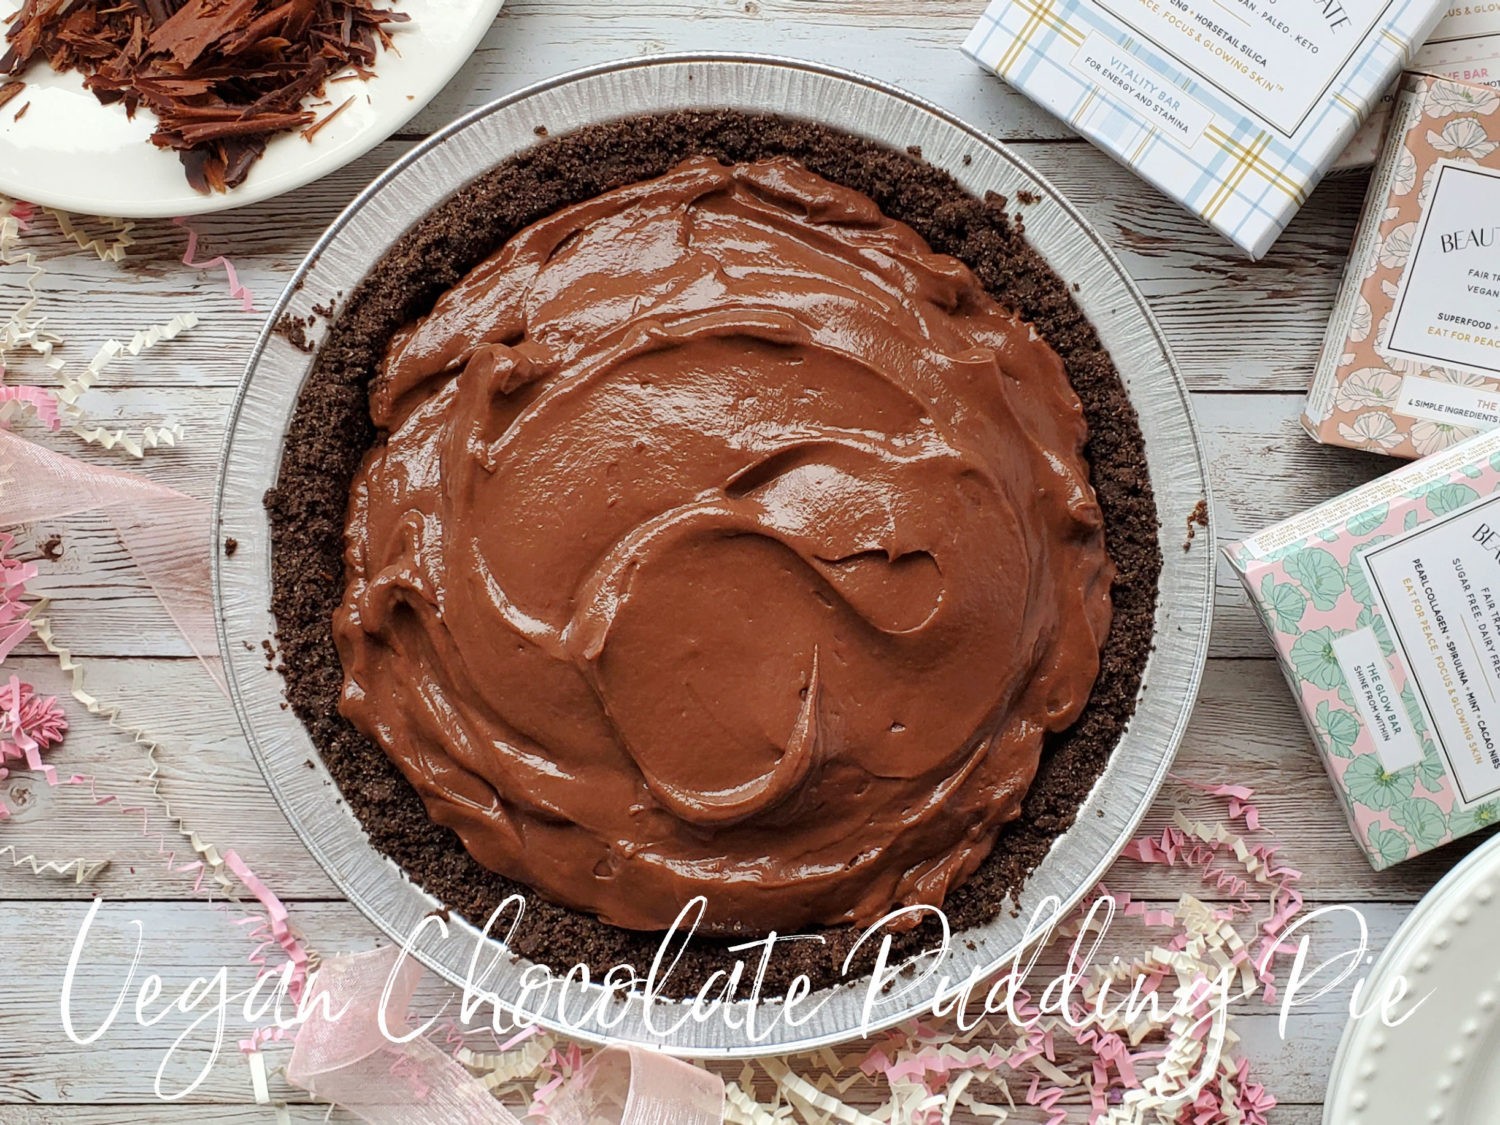 Vegan Chocolate Pudding Pie with Beauty Bar Chocolate is super creamy, just the right amount of sweet, with homemade chocolate shavings.  